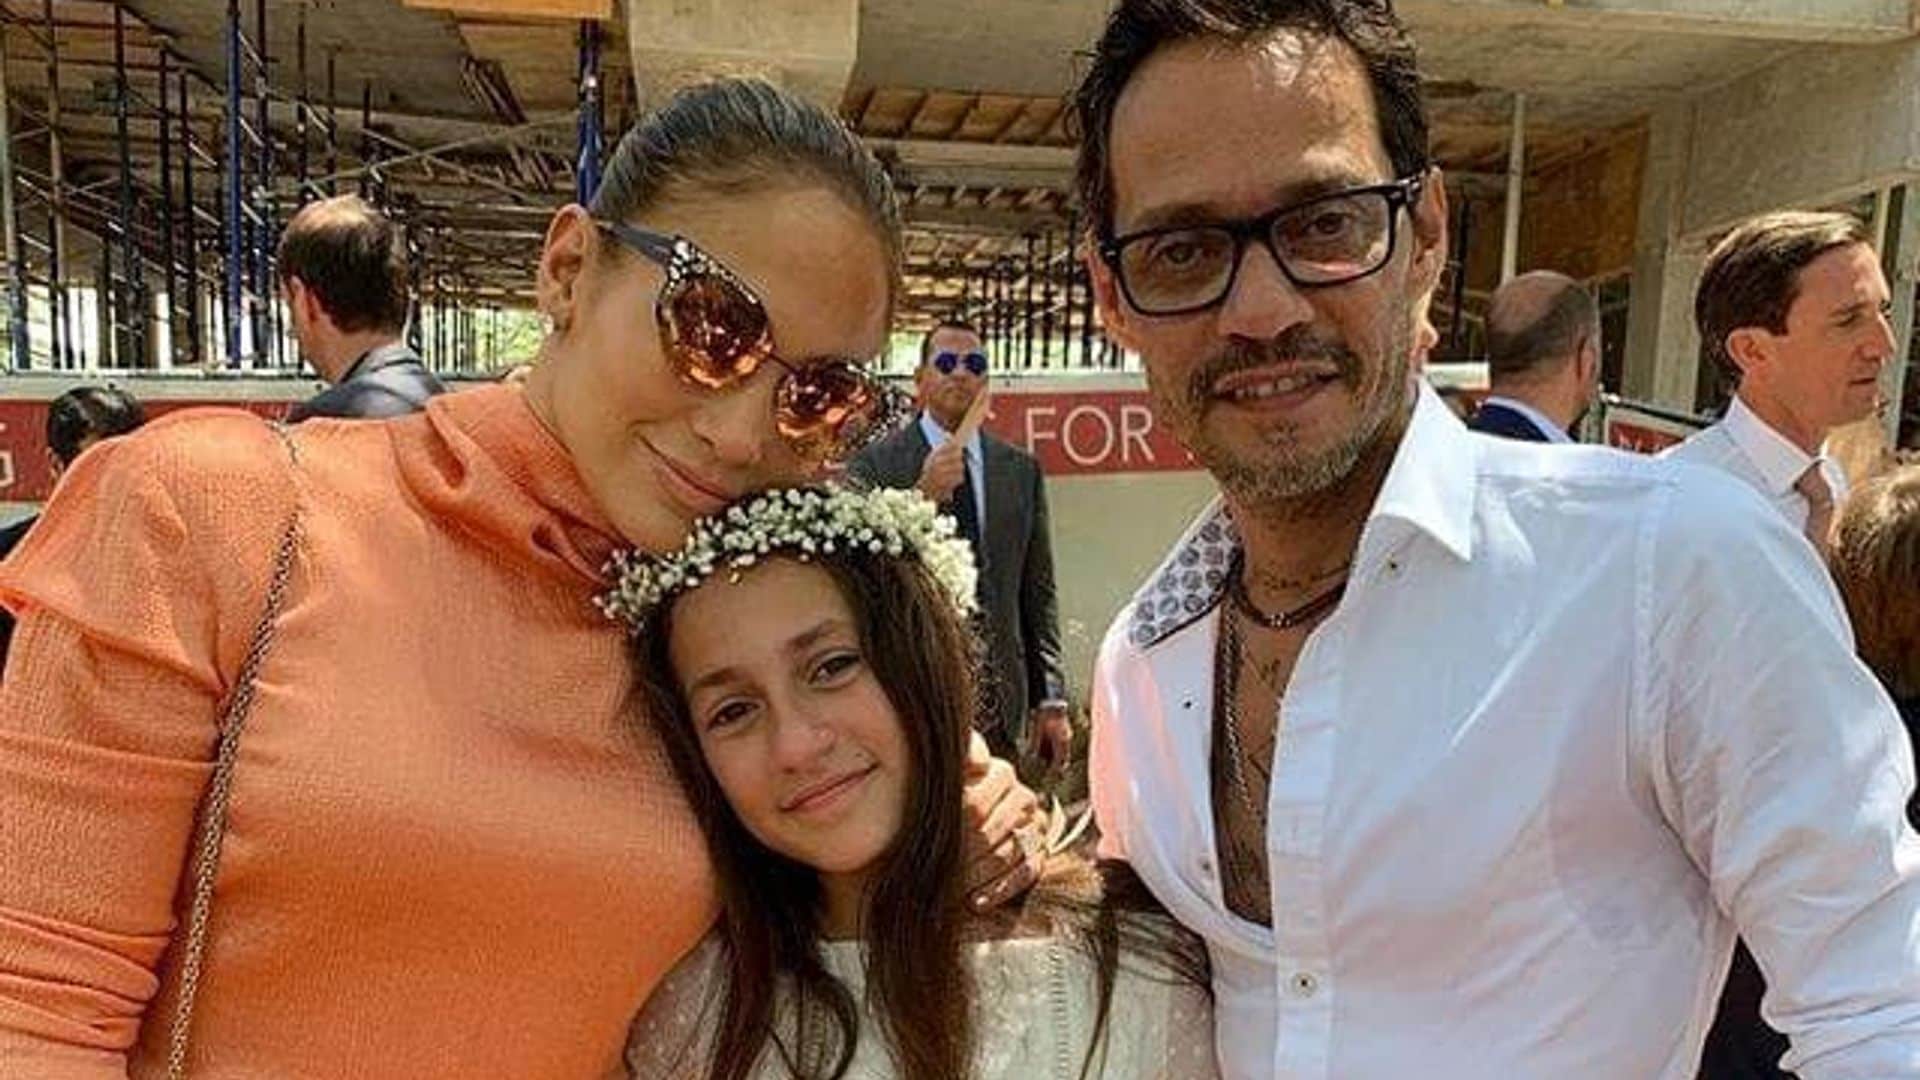 Jennifer Lopez's daughter Emme opens up about her famous parents and A-Rod's daughters